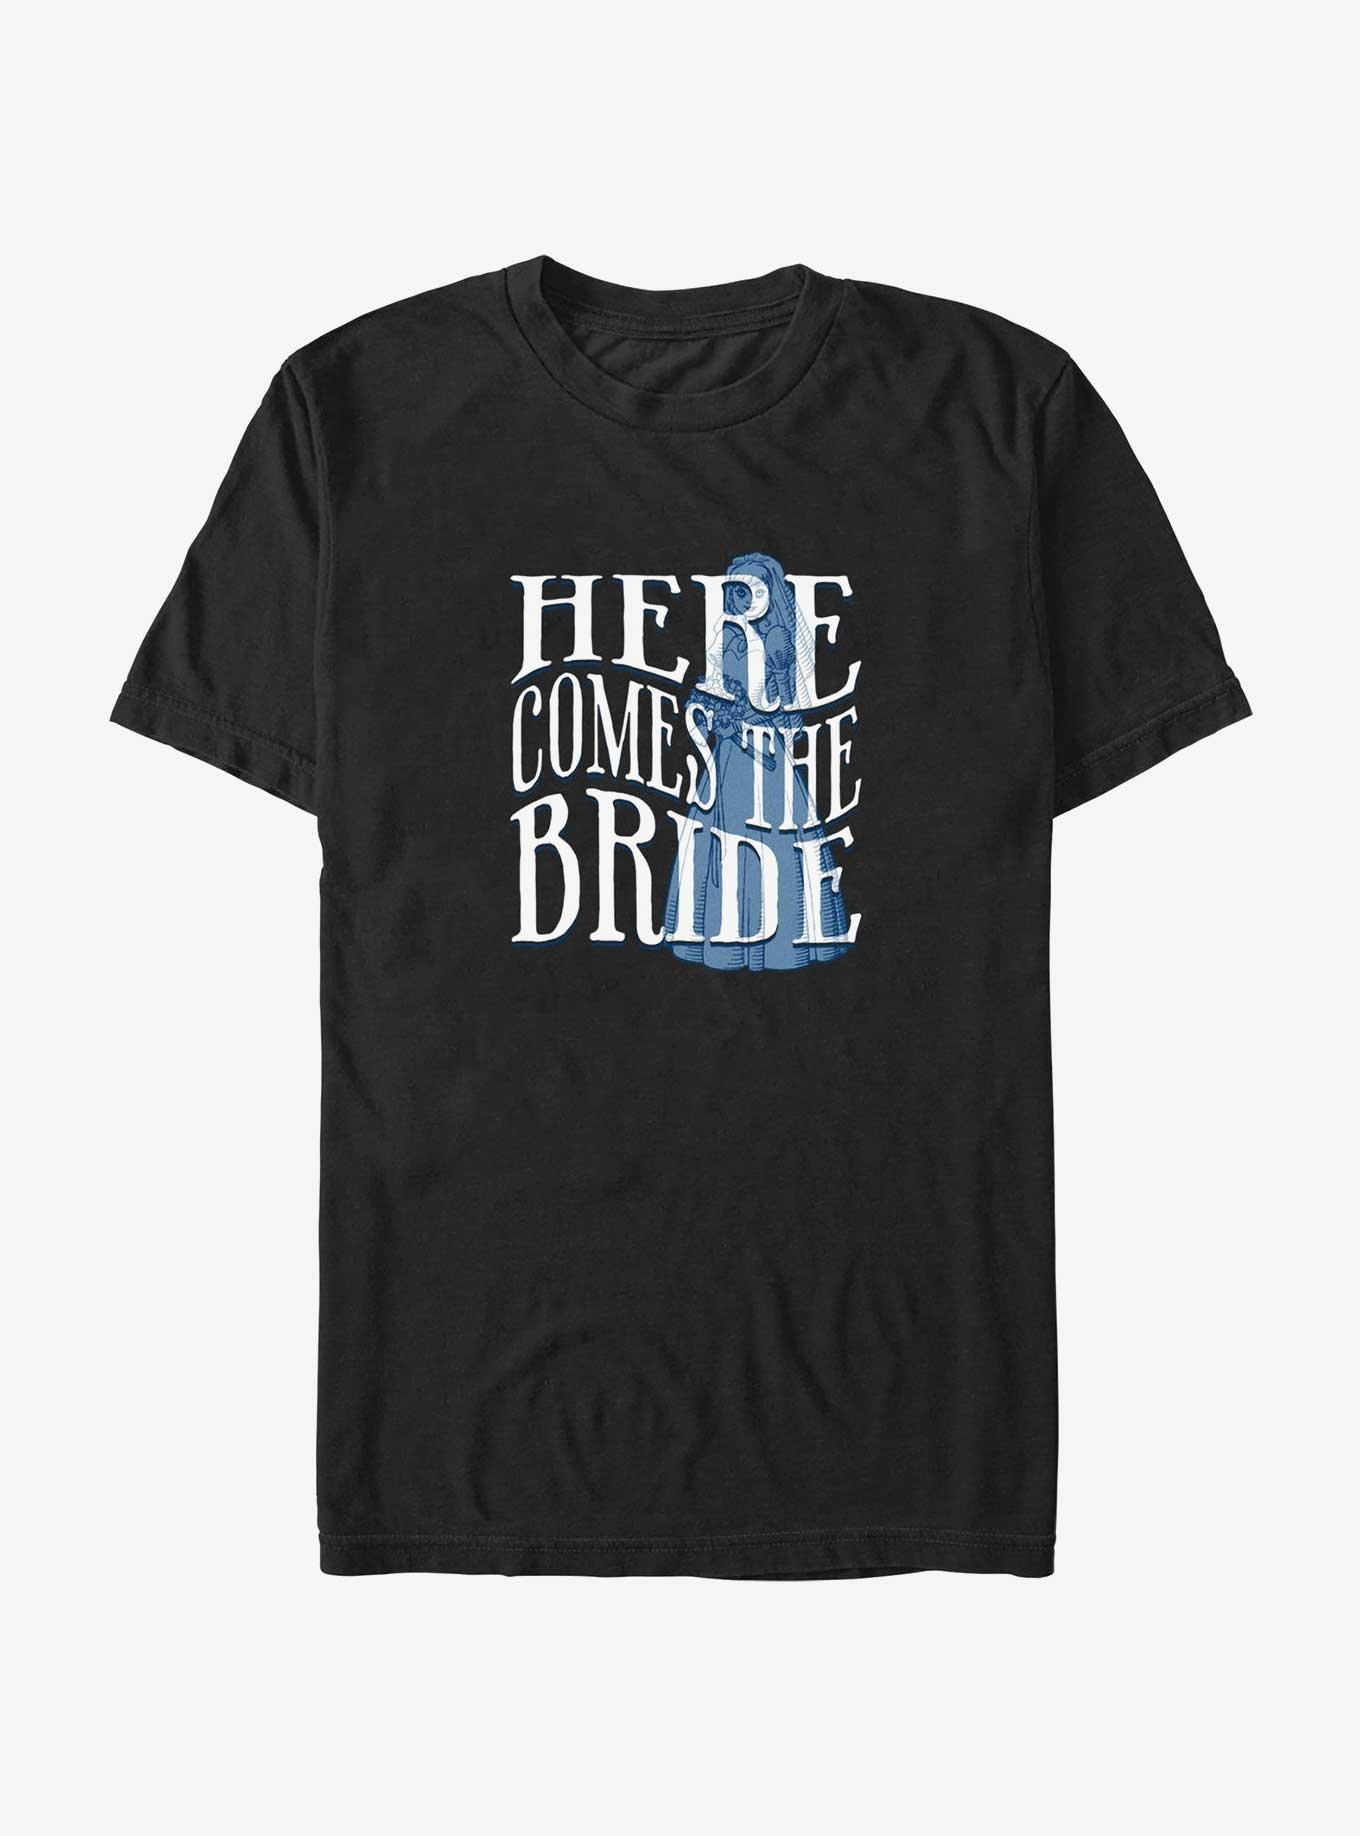 Disney Haunted Mansion Here Comes The Ghost Bride Extra Soft T-Shirt, BLACK, hi-res